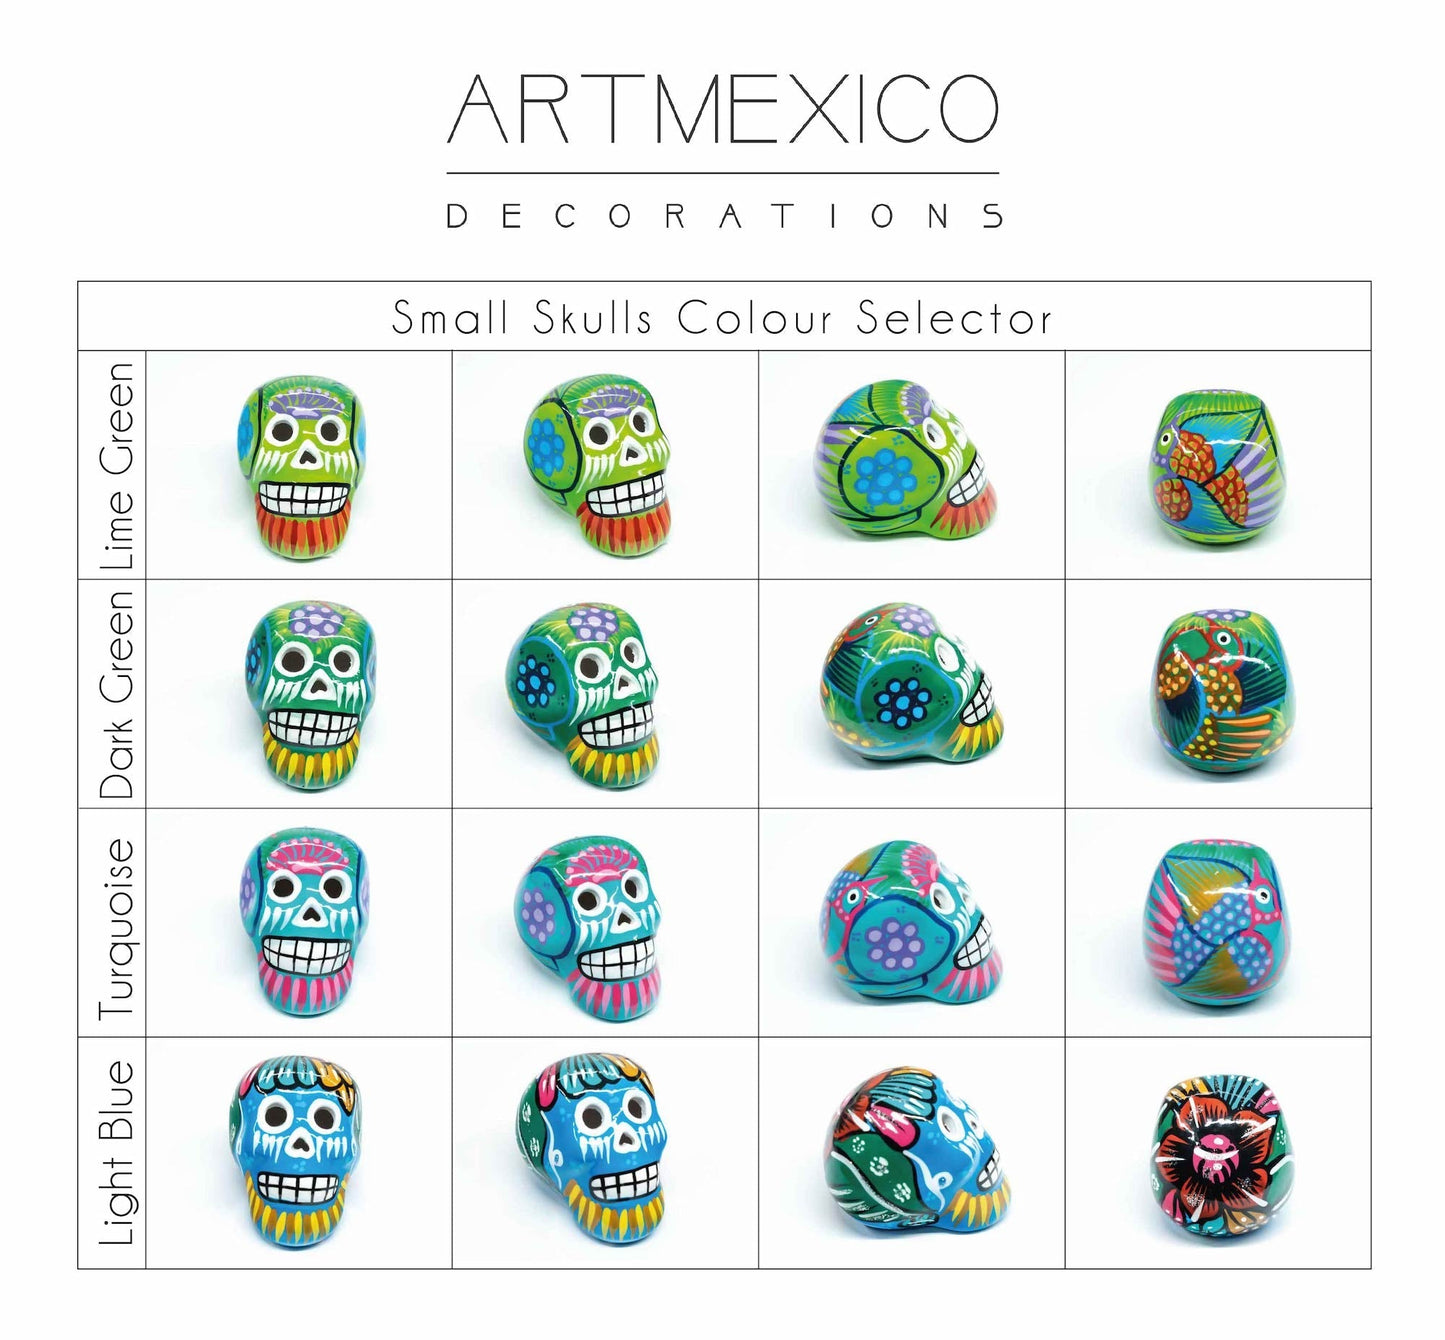 100 Small Mexican Ceramic Skulls Wholesale, Day of the Dead Decorations, Individually Gift Boxed